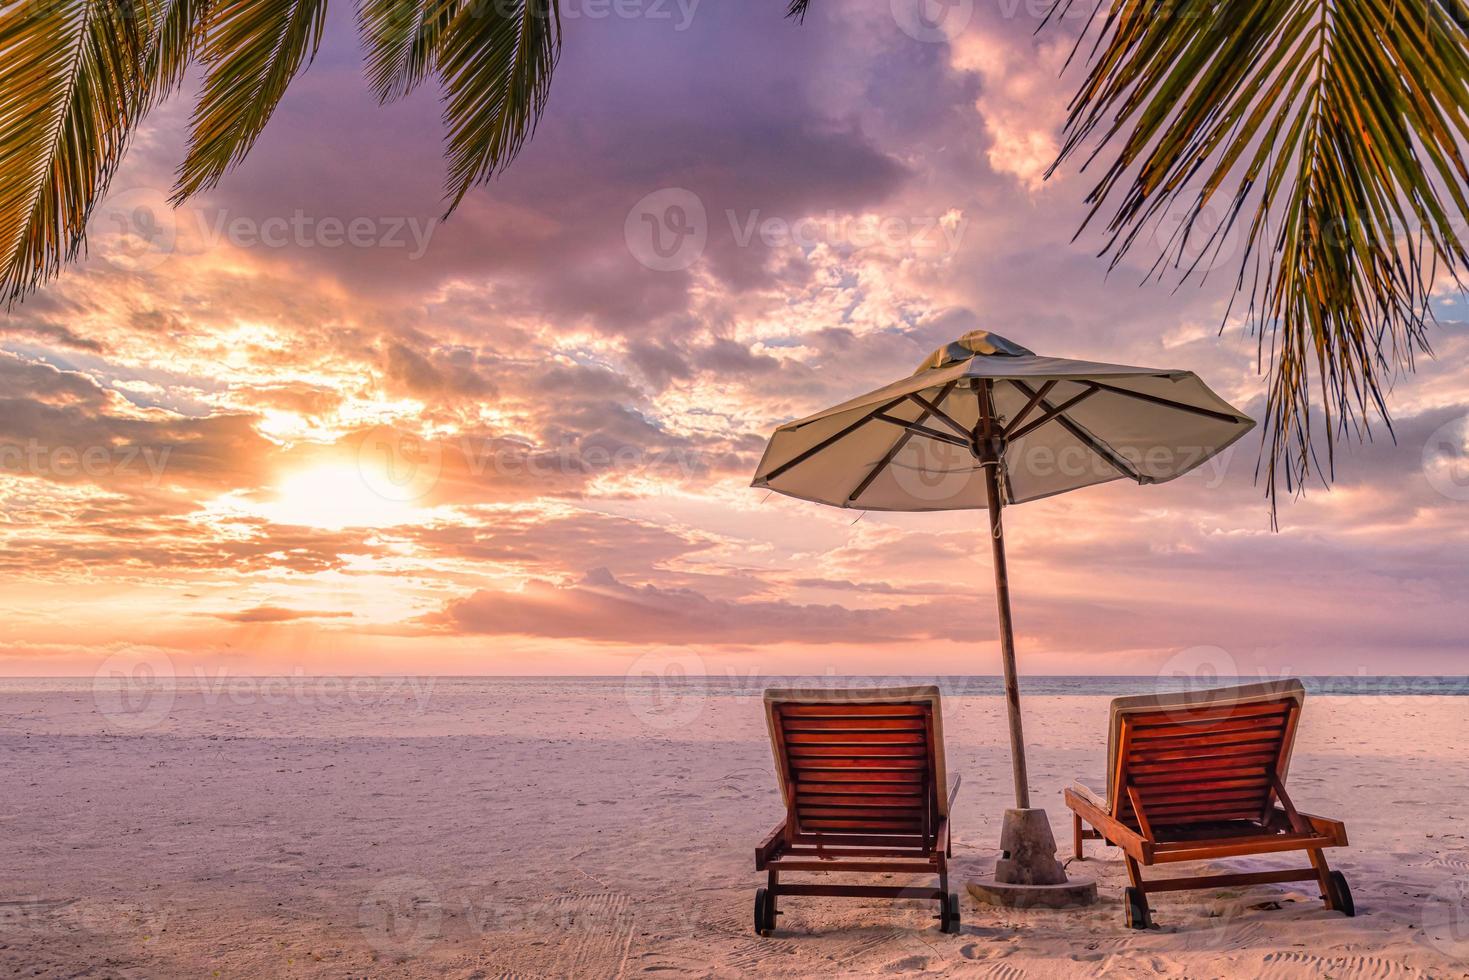 Perfect tropical sunset scenery, two sun beds, loungers, umbrella under palm tree. White sand, sea view with horizon, colorful twilight sky, calmness and relaxation. Inspirational beach resort hotel photo